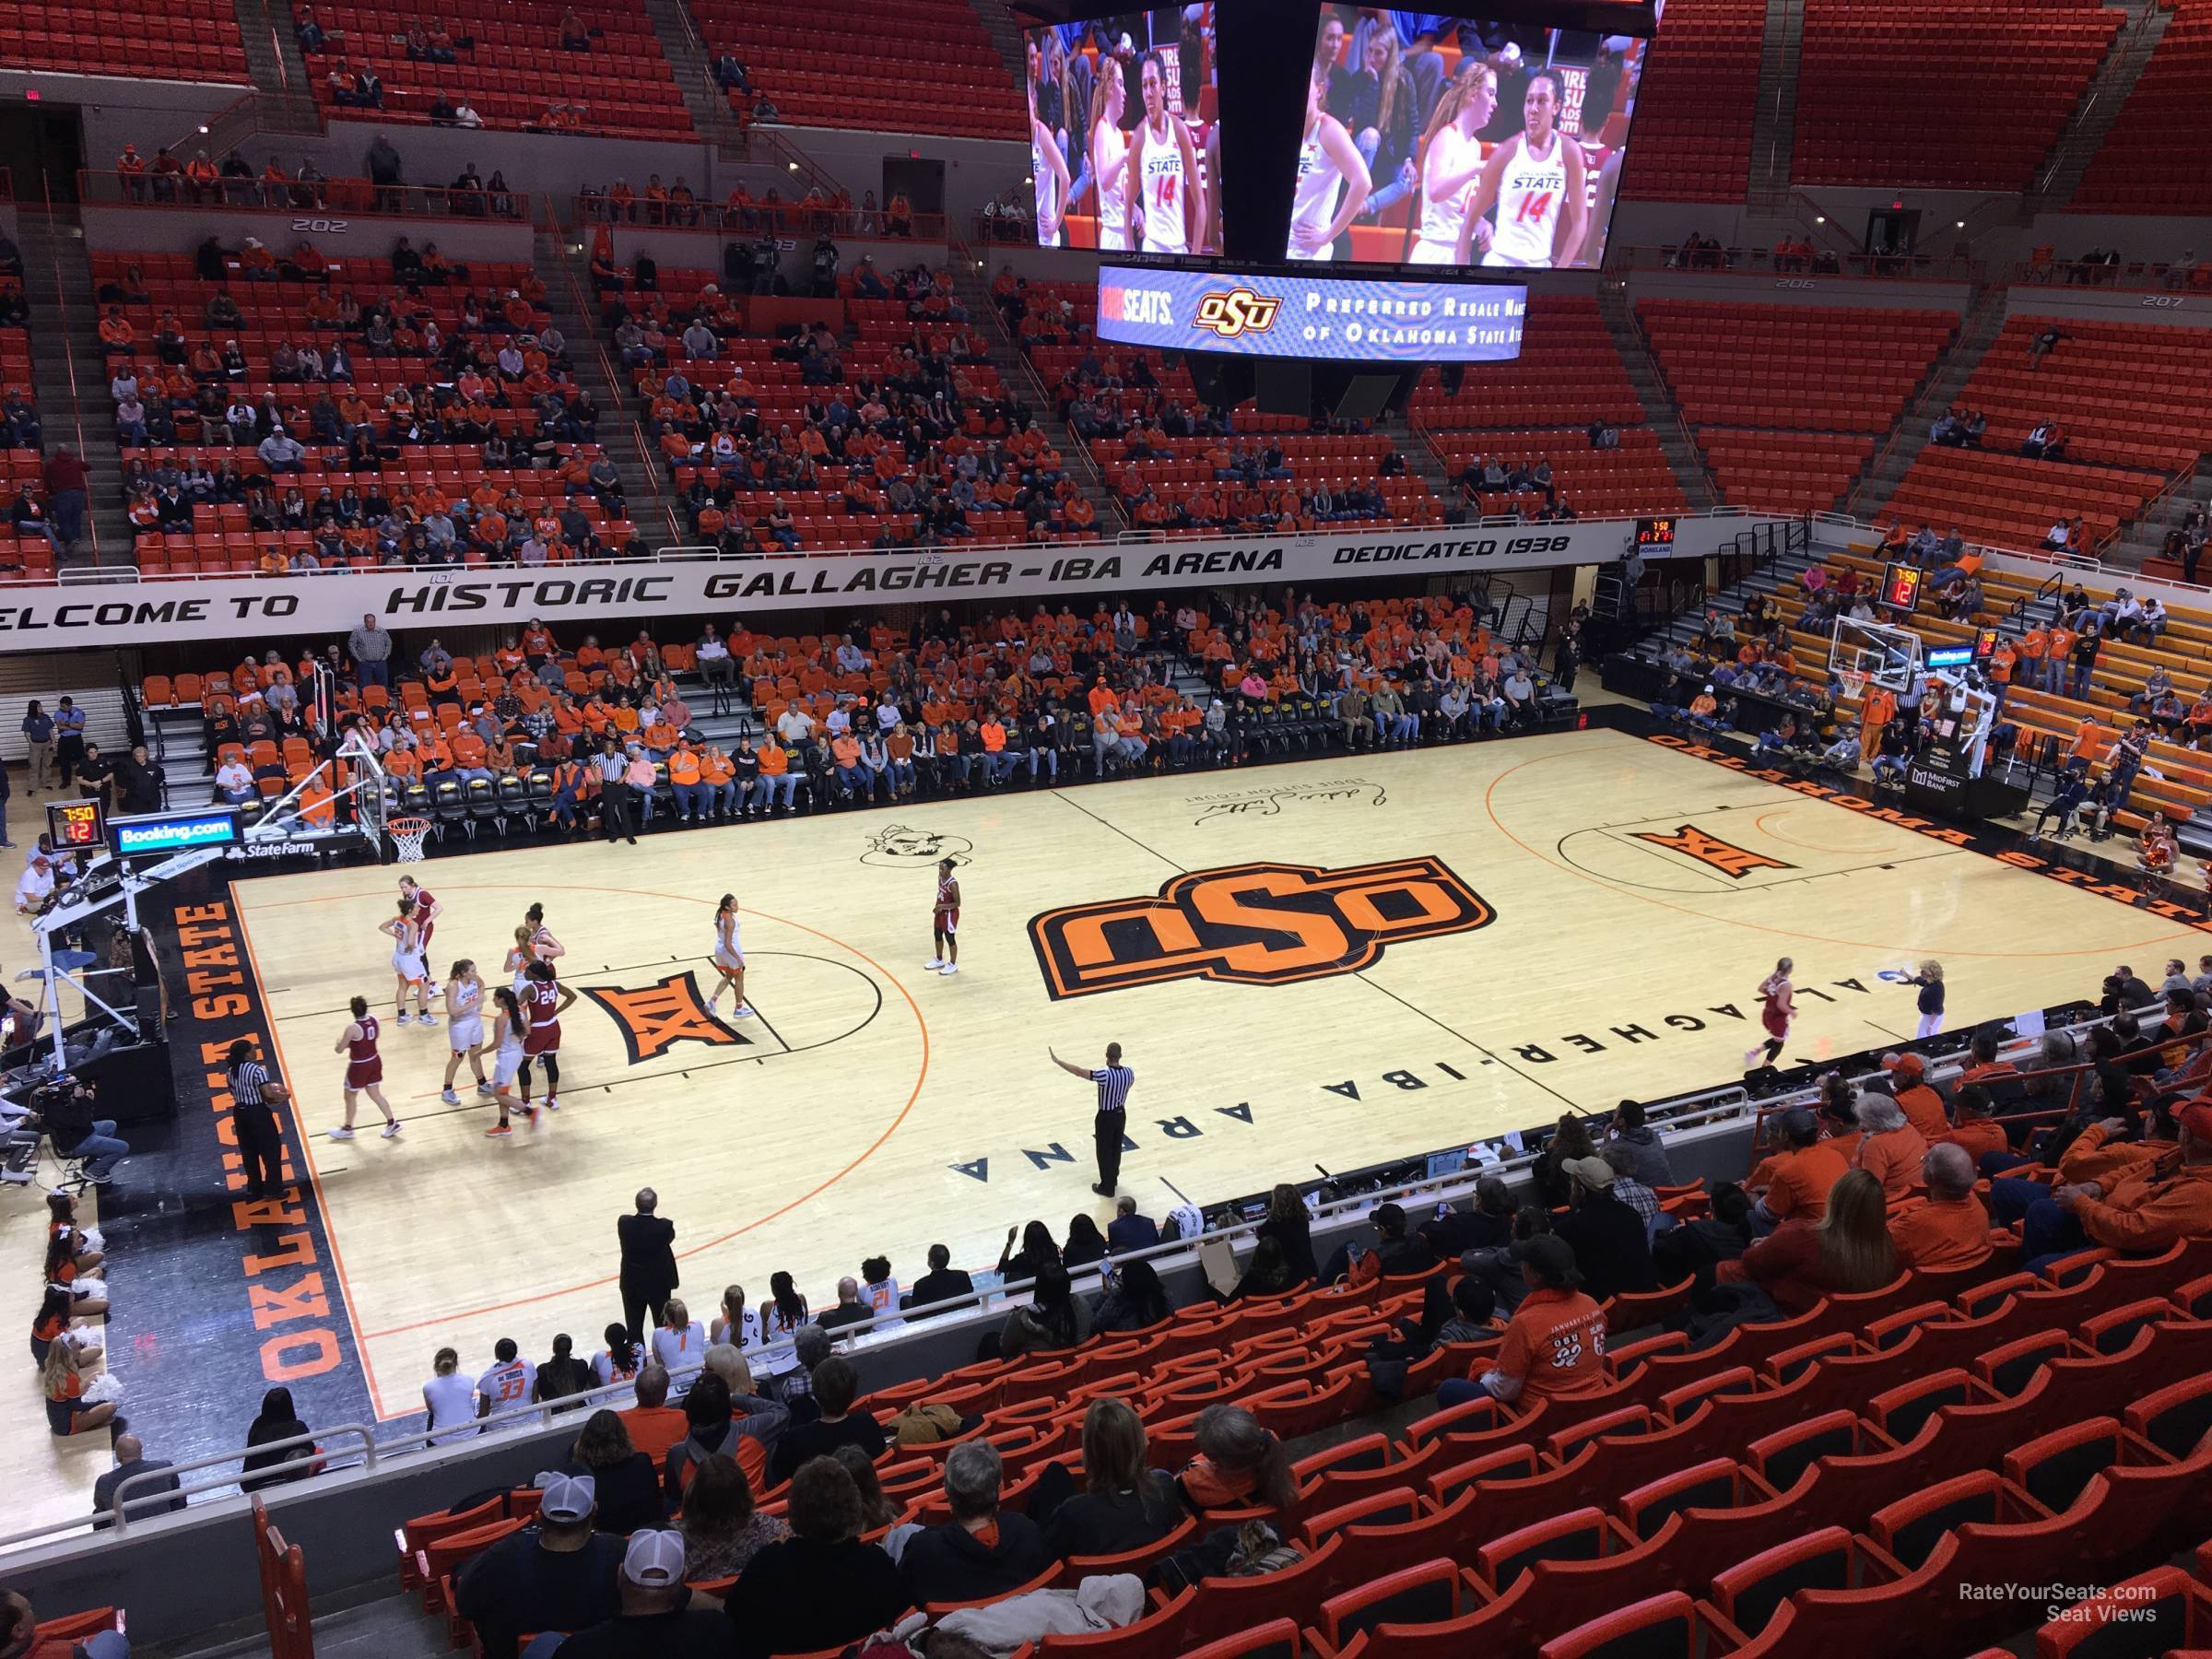 section 215, row 13 seat view  - gallagher-iba arena